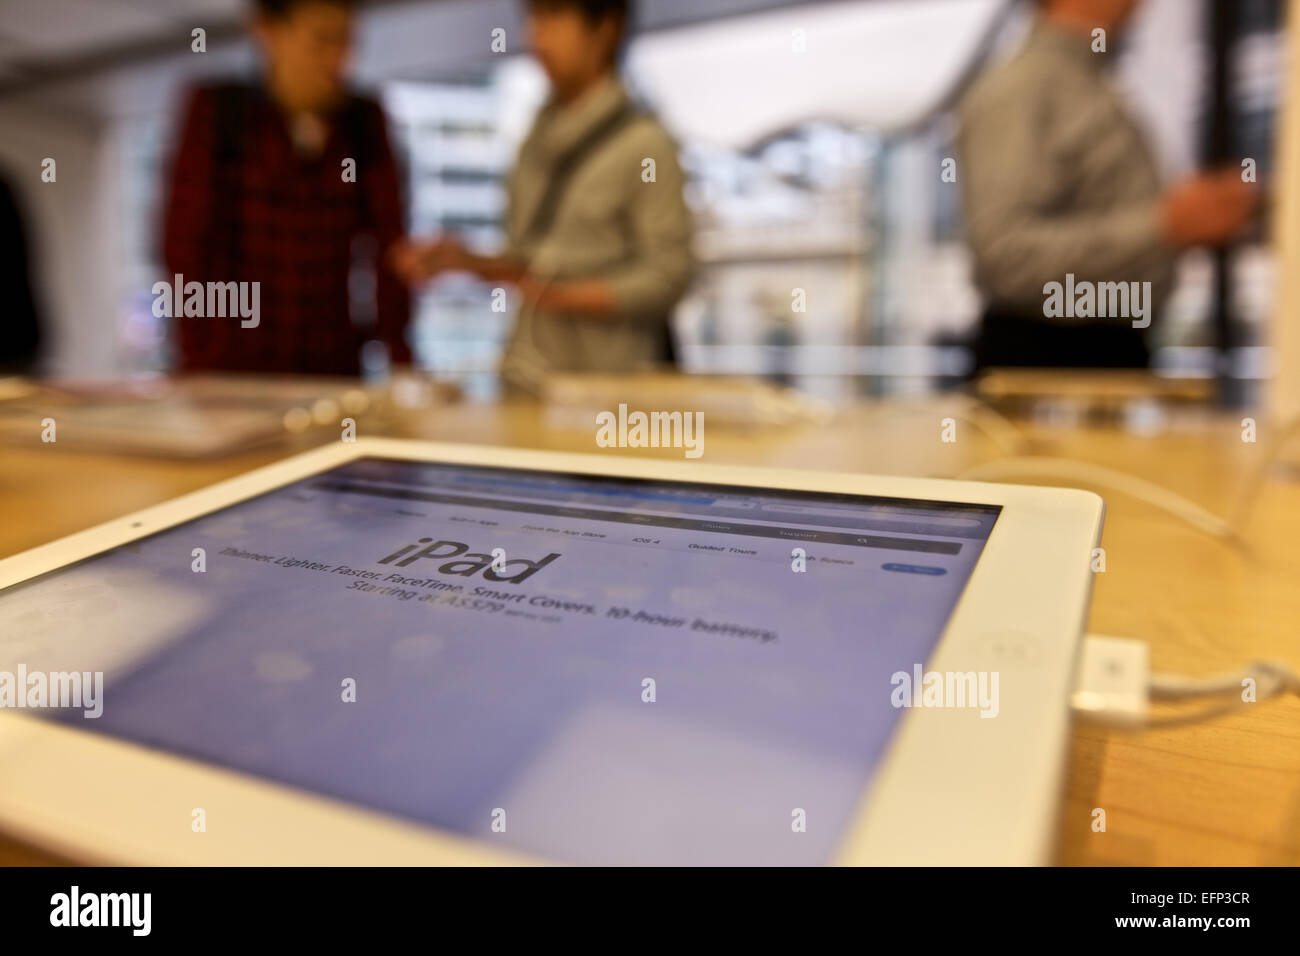 iPad in an Apple Computer Store Stock Photo